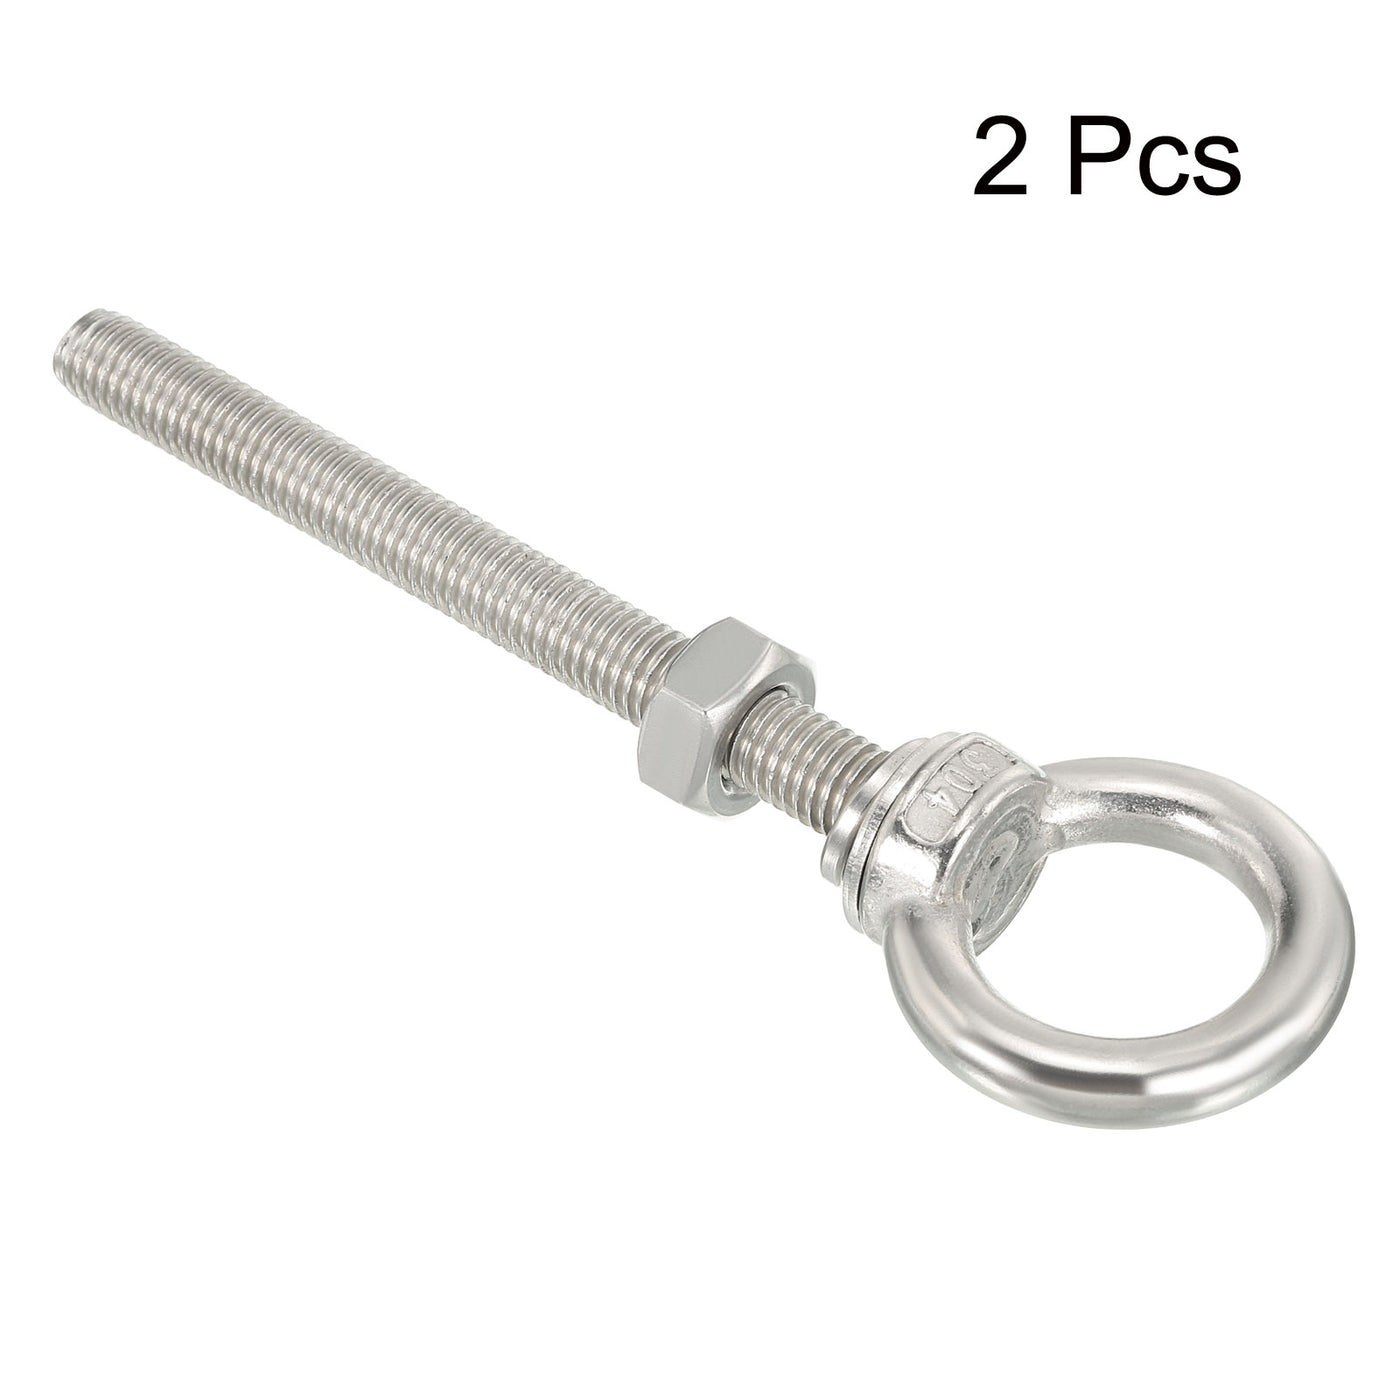 uxcell Uxcell M10x100 3/8"x4" Stainless Steel Eye Bolts Threaded Screw Eyebolt Shoulder Ring with Nuts Washers for Lifting Hanging, 2 Set